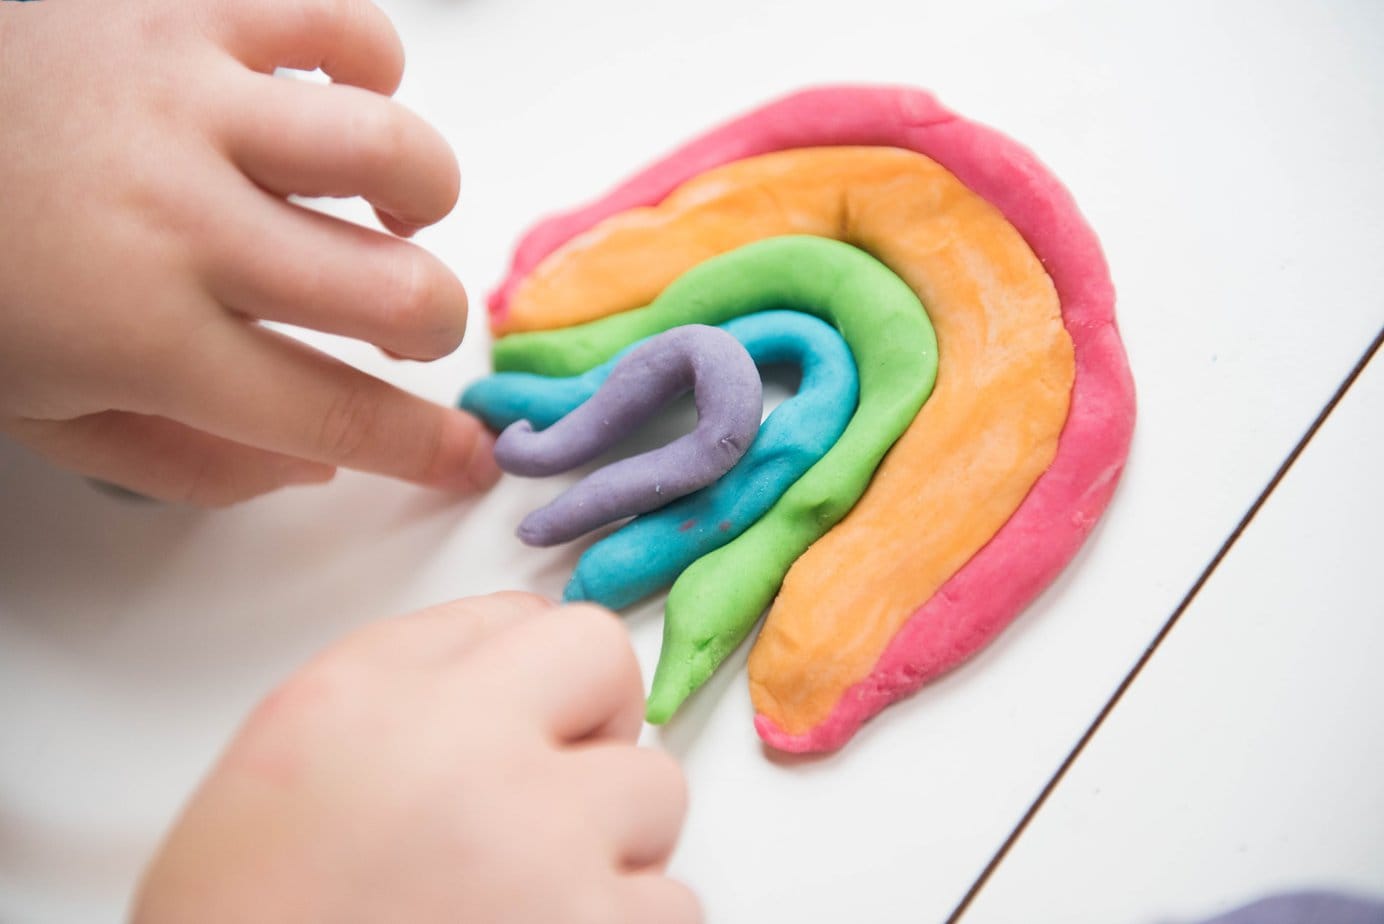 What are the benefits of playing with plasticine?